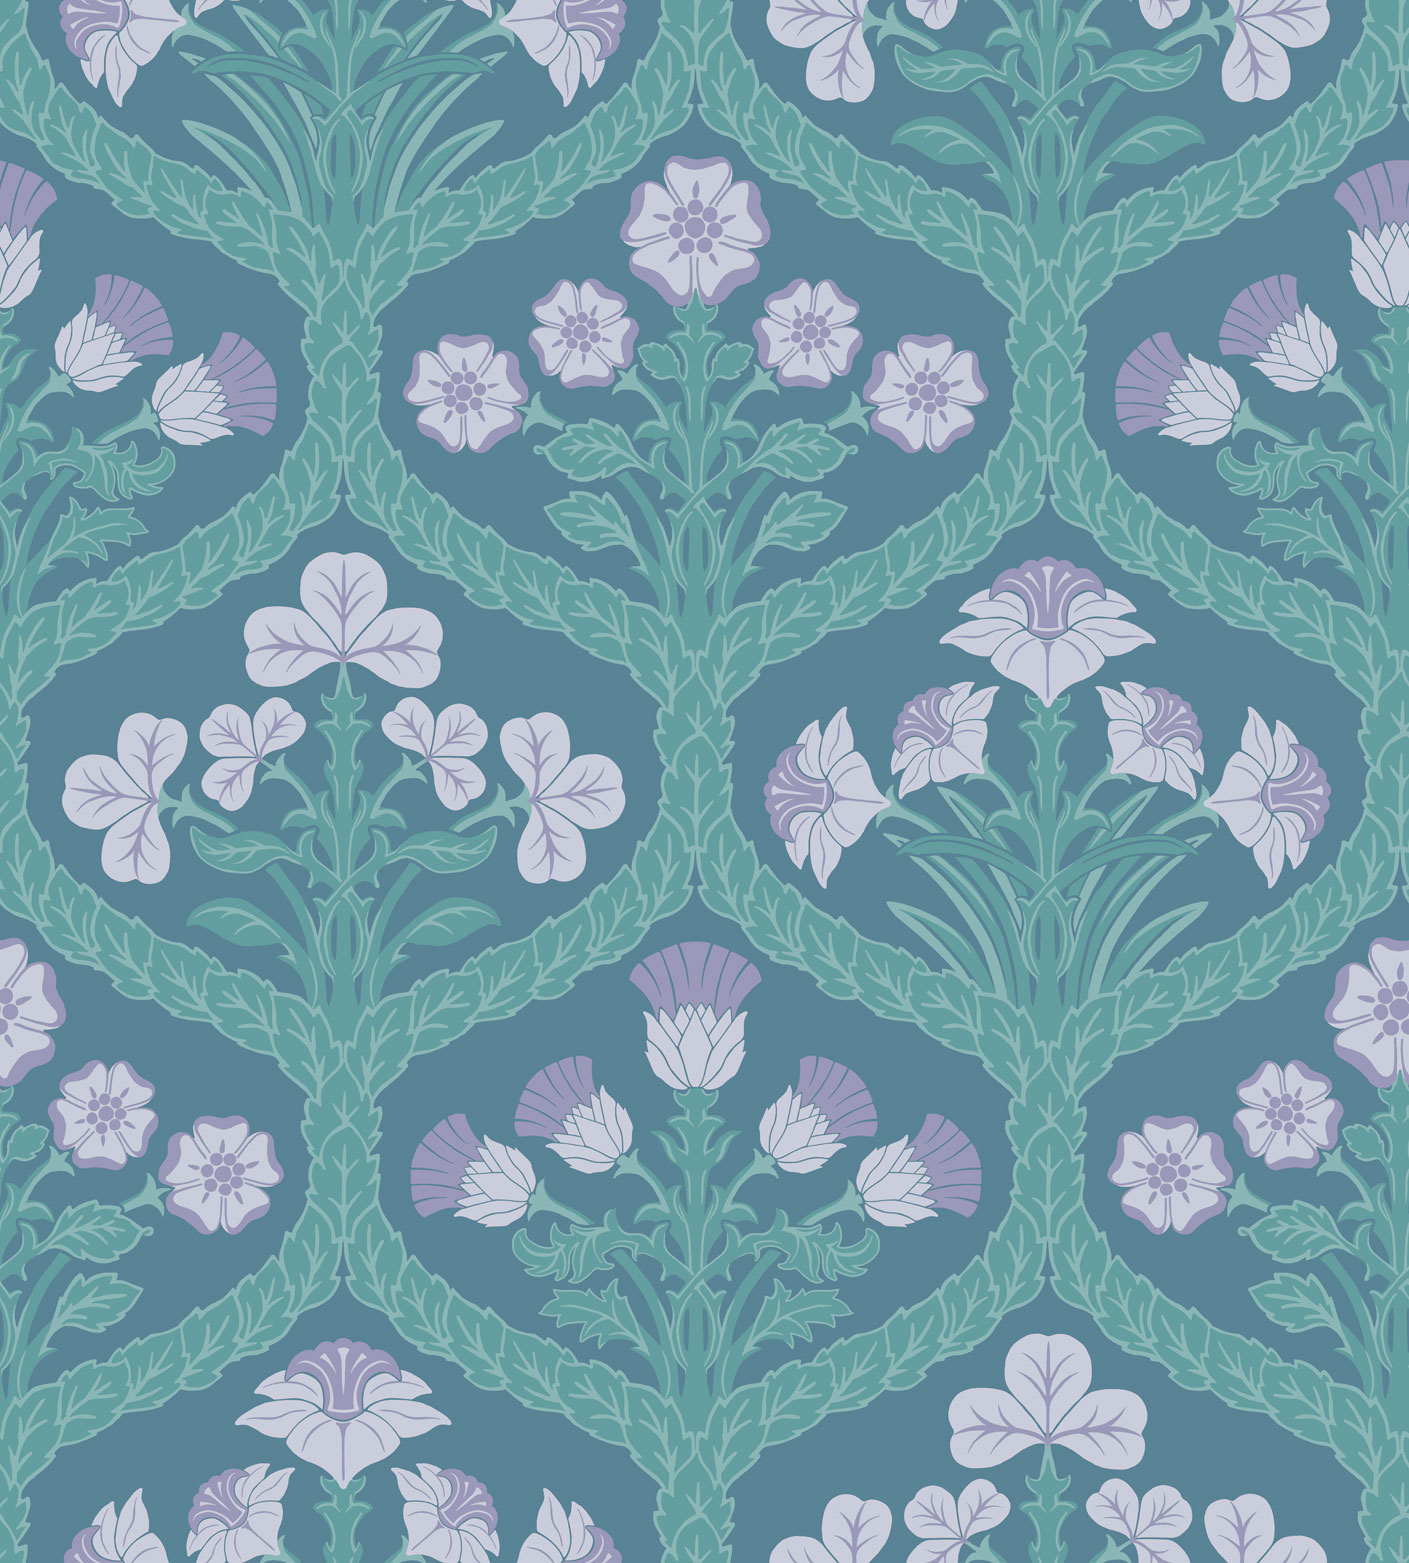 Wallpaper - Cole and Son - Pearwood - Floral Kingdom - Lilac & Teal on Denim